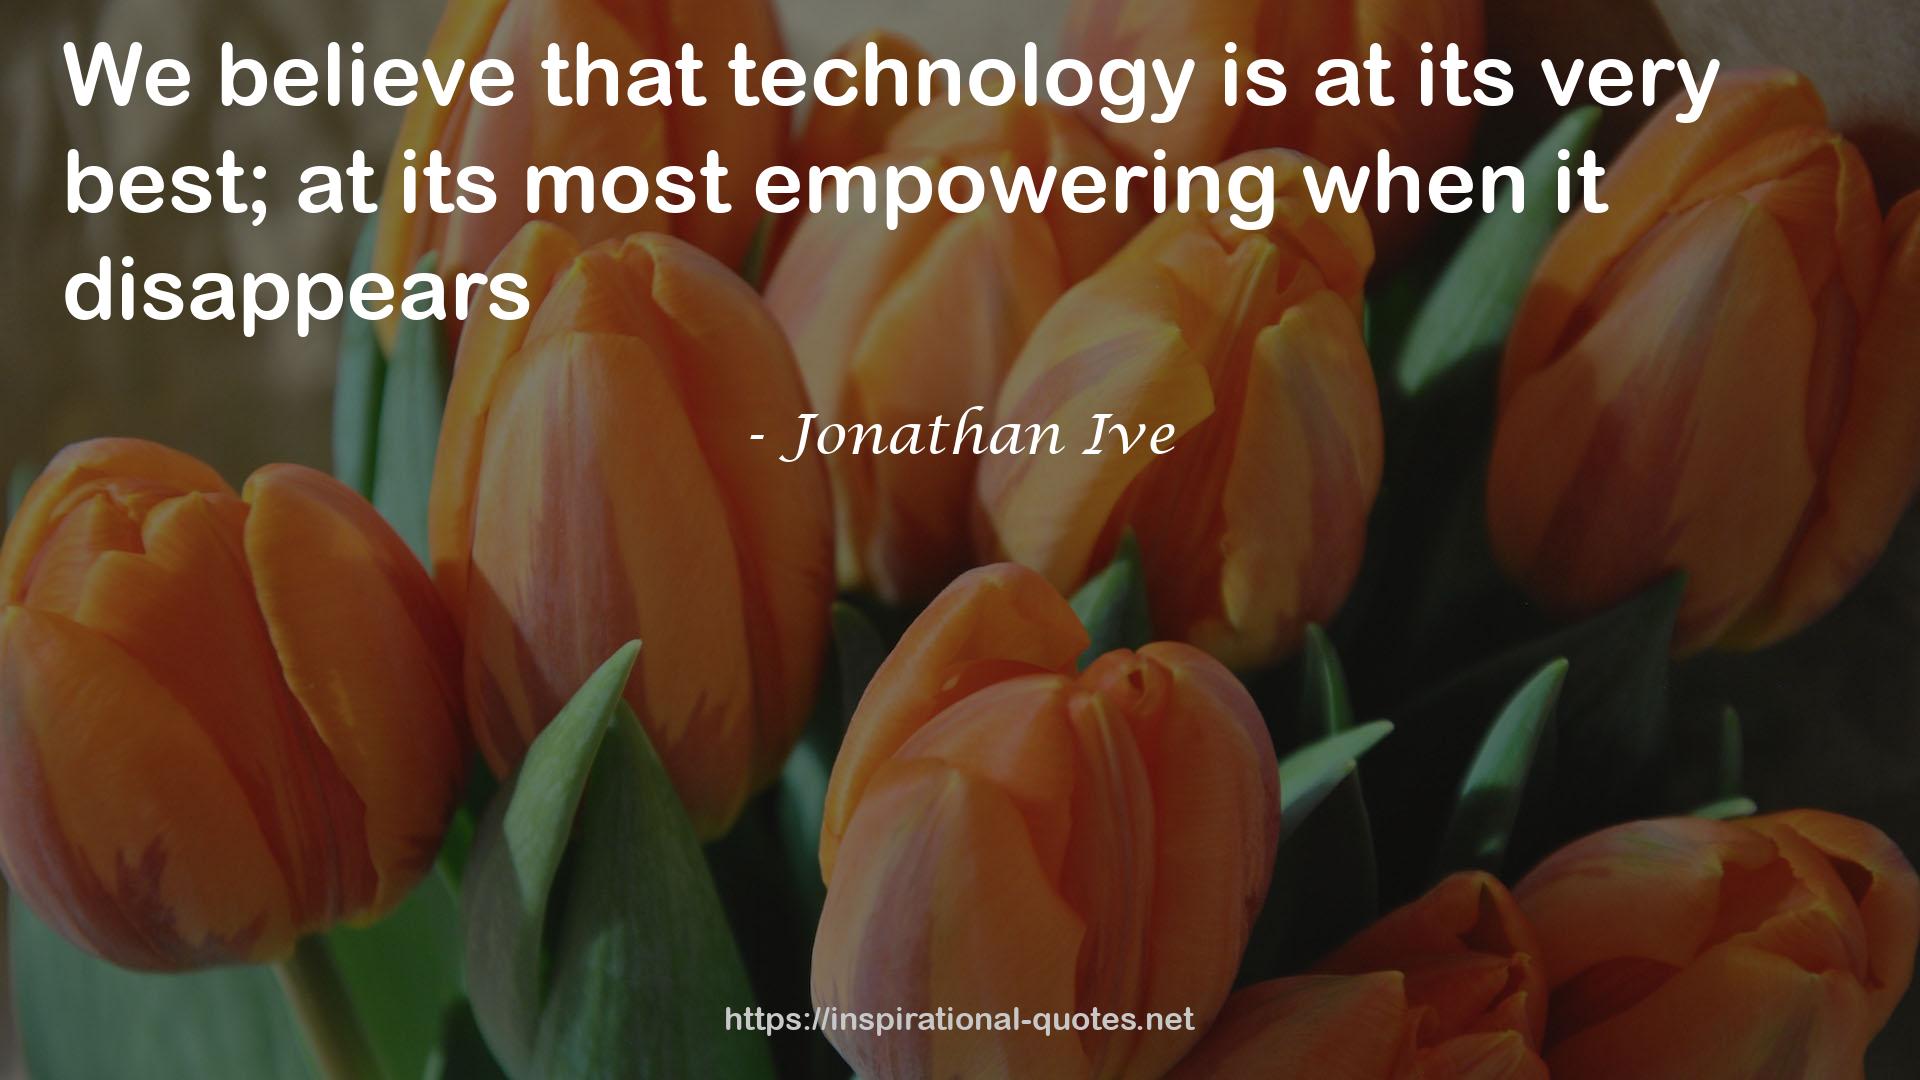 Jonathan Ive QUOTES